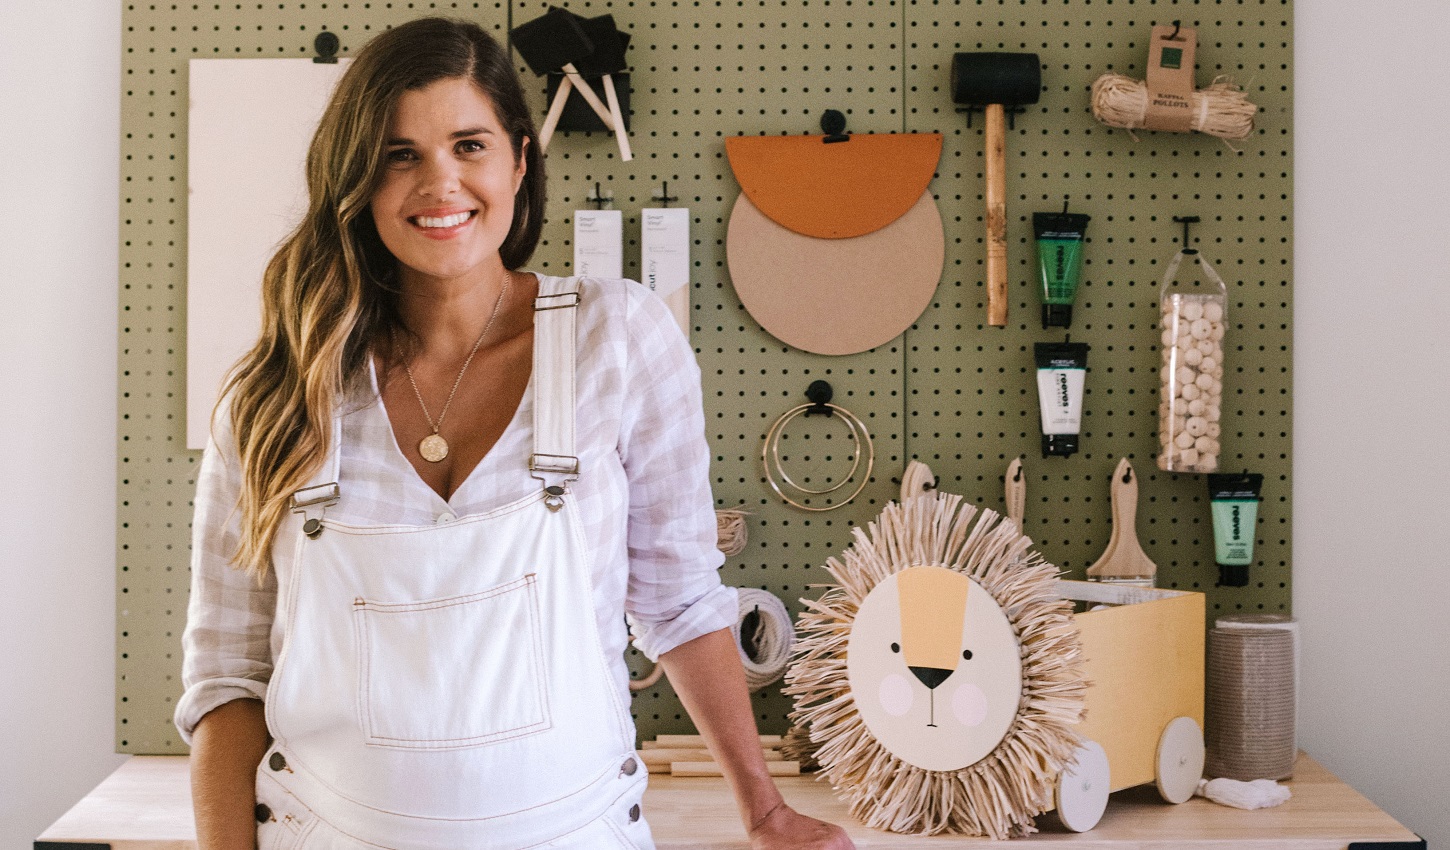 Maker Special: All things DIY and creating with Geneva Vanderzeil